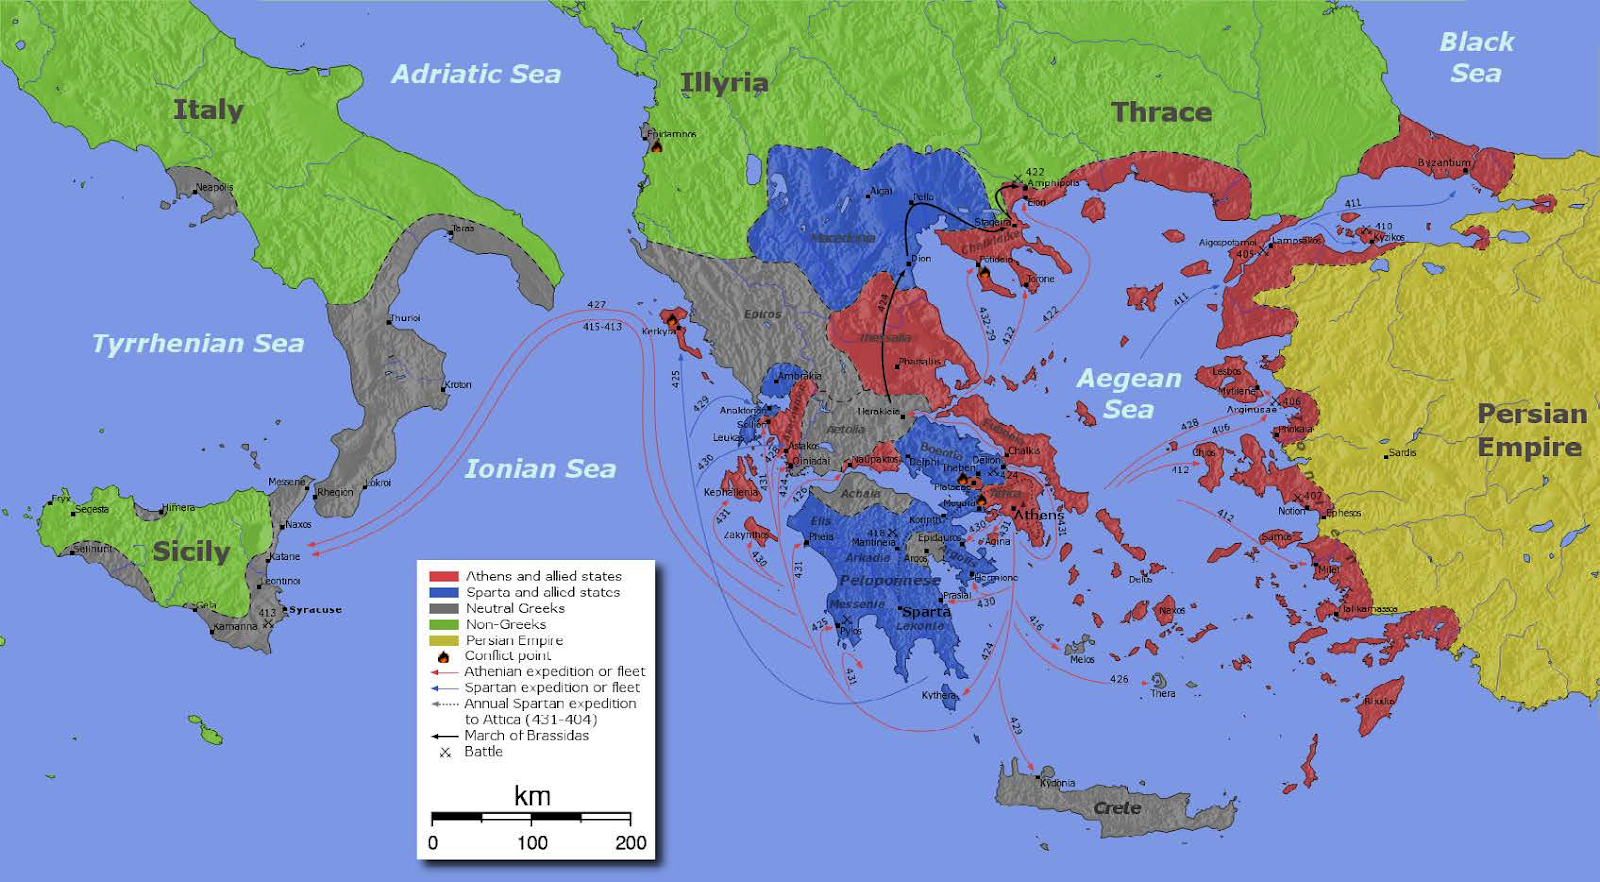 Map of the Sicilian Expedition | Author: User “Kenmyer” | Source: Wikimedia Commons | License: CC0- No Rights Reserved